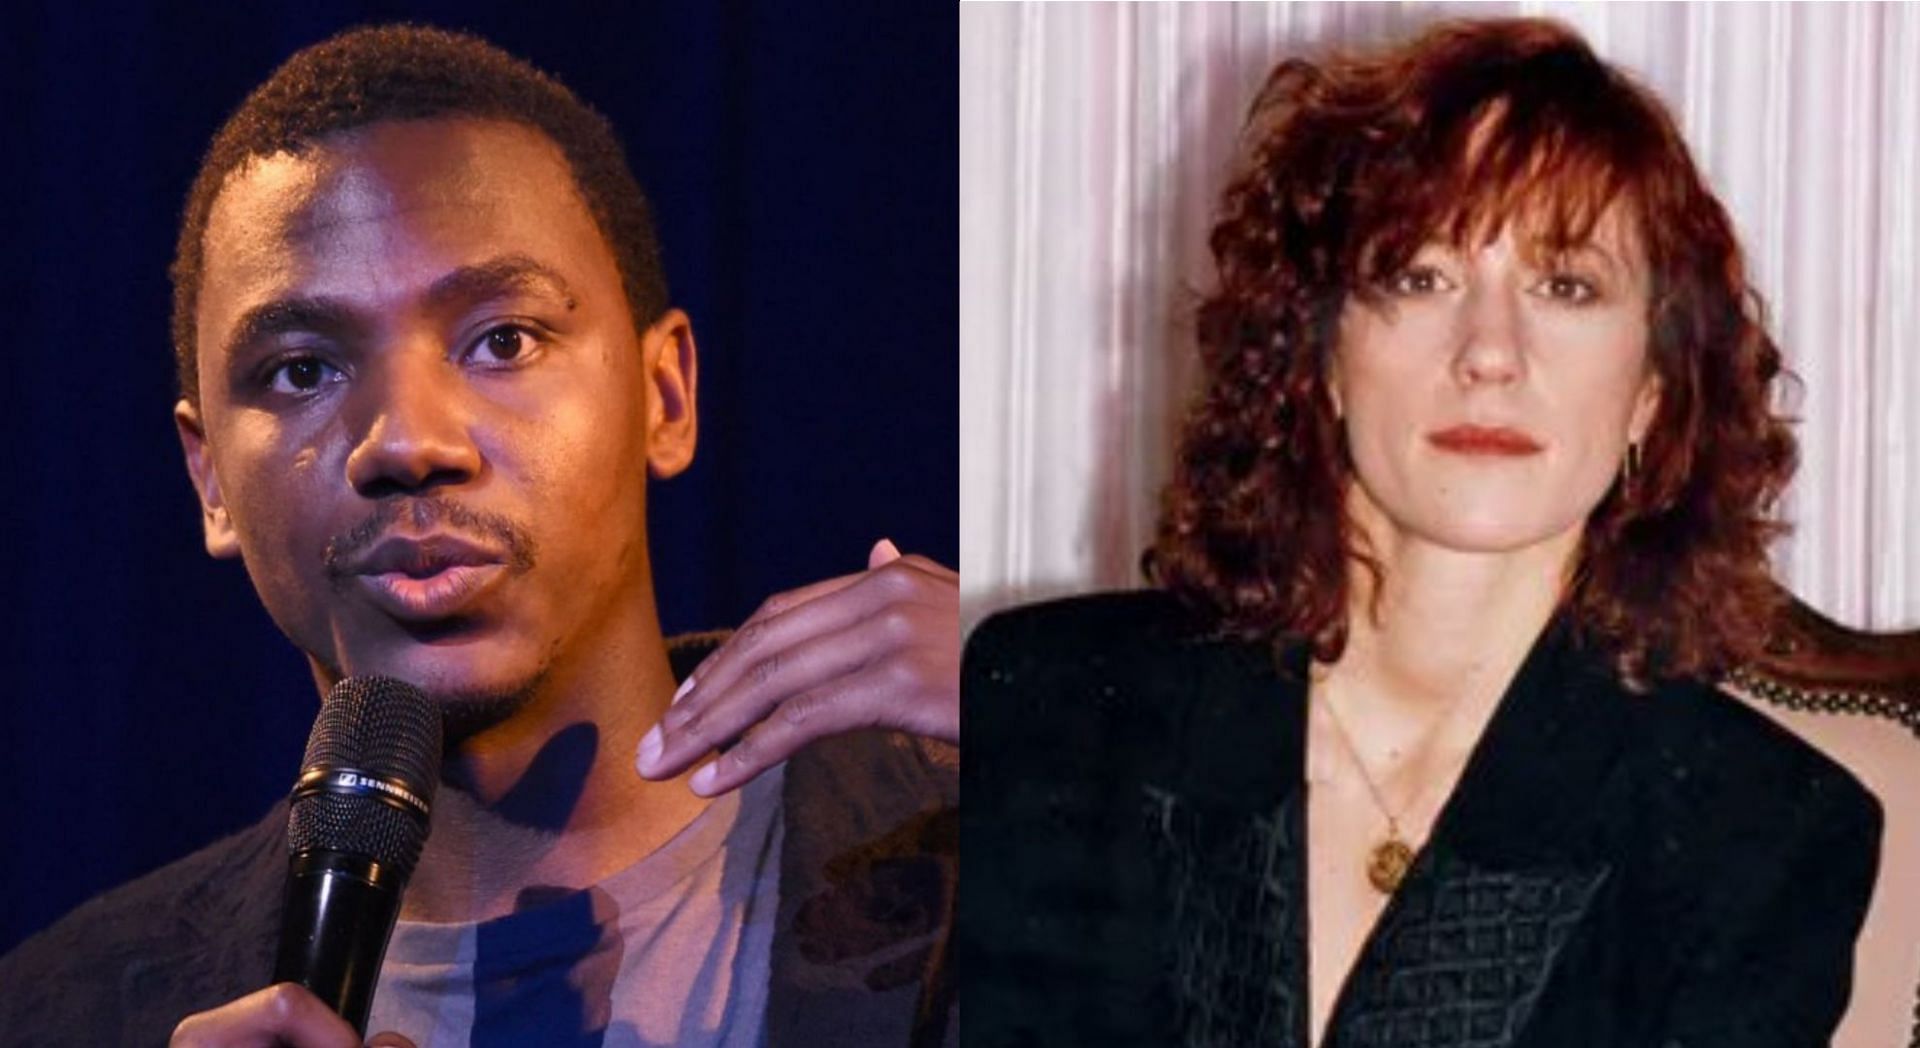 Jerrod Carmichael made a joke about Shelly Miscavige during the Golden Globes Award (Image via Getty Images)